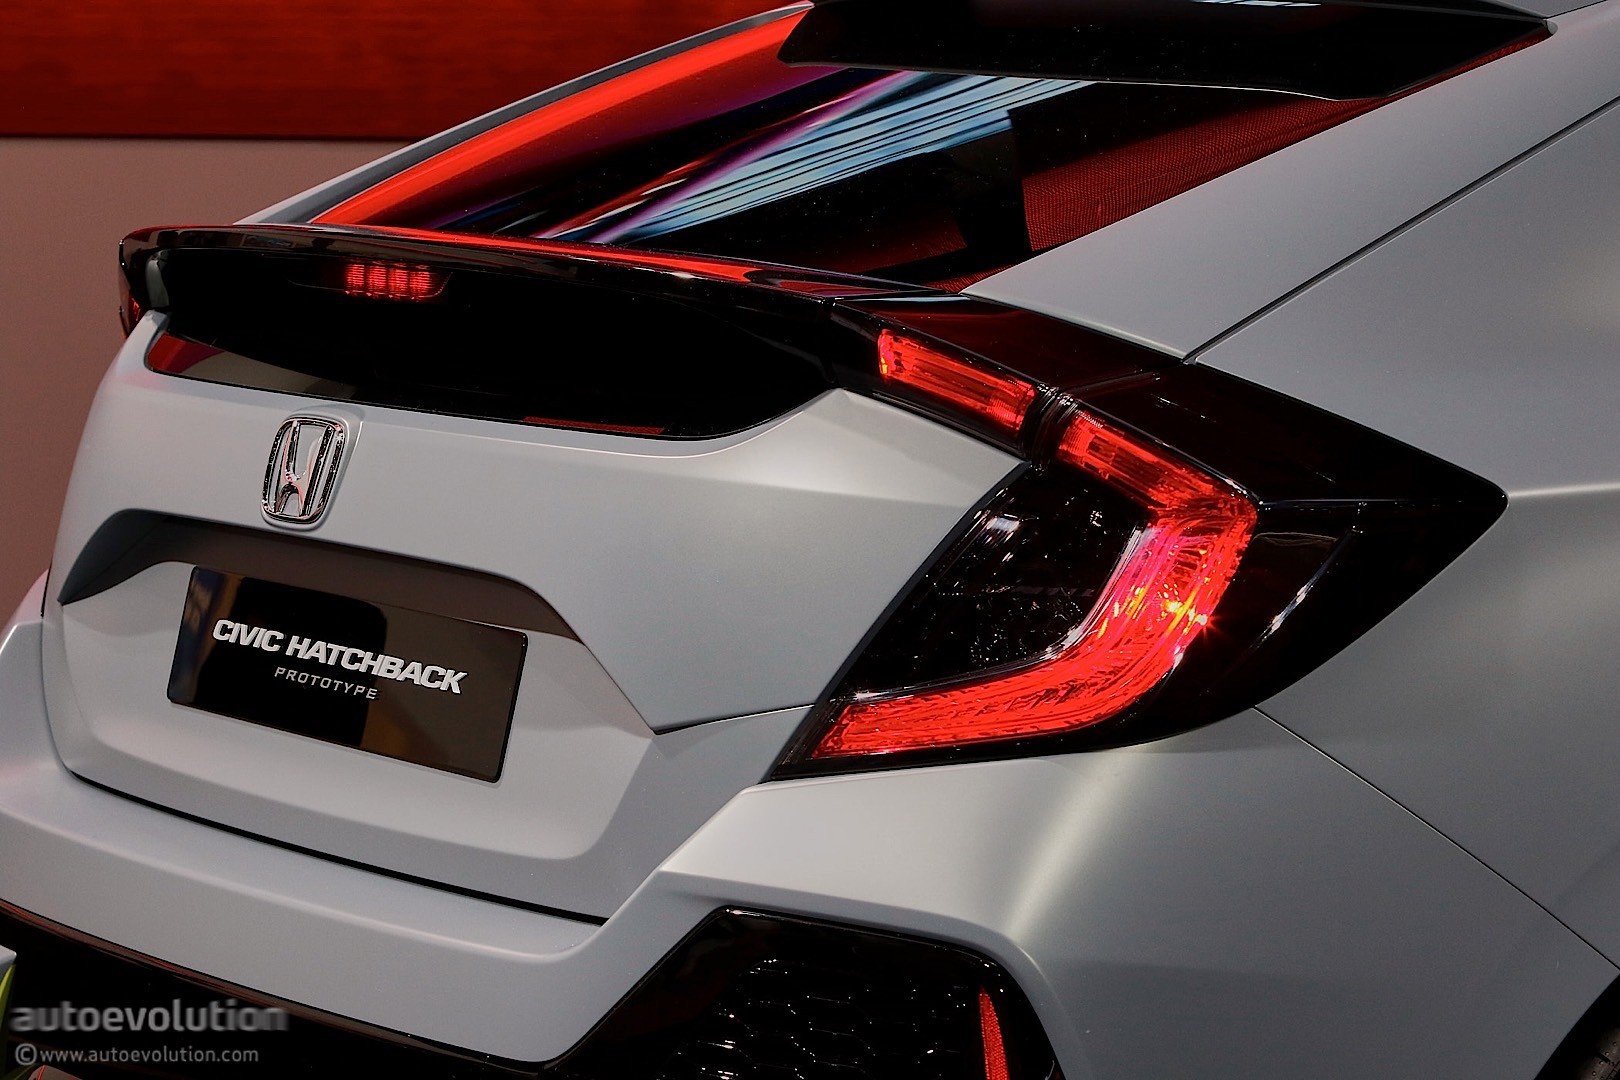 honda-civic-hatchback-coming-to-new-york-civic-si-and-new-type-r-in-2017_4.jpg